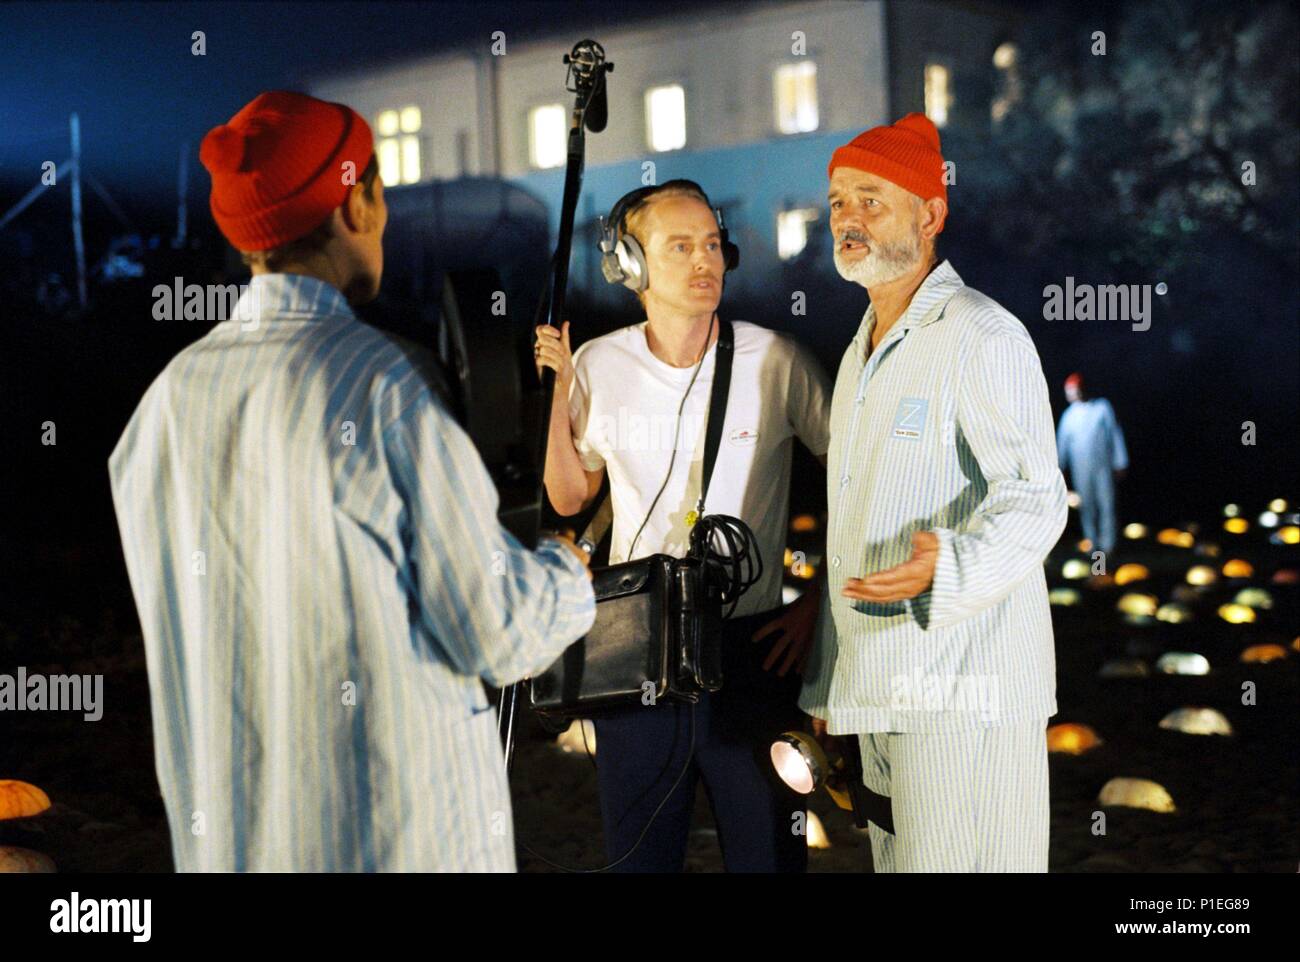 Original Film Title: THE LIFE AQUATIC WITH STEVE ZISSOU.  English Title: THE LIFE AQUATIC WITH STEVE ZISSOU.  Film Director: WES ANDERSON.  Year: 2004.  Stars: BILL MURRAY. Credit: TOUCHSTONE PICTURES / Album Stock Photo